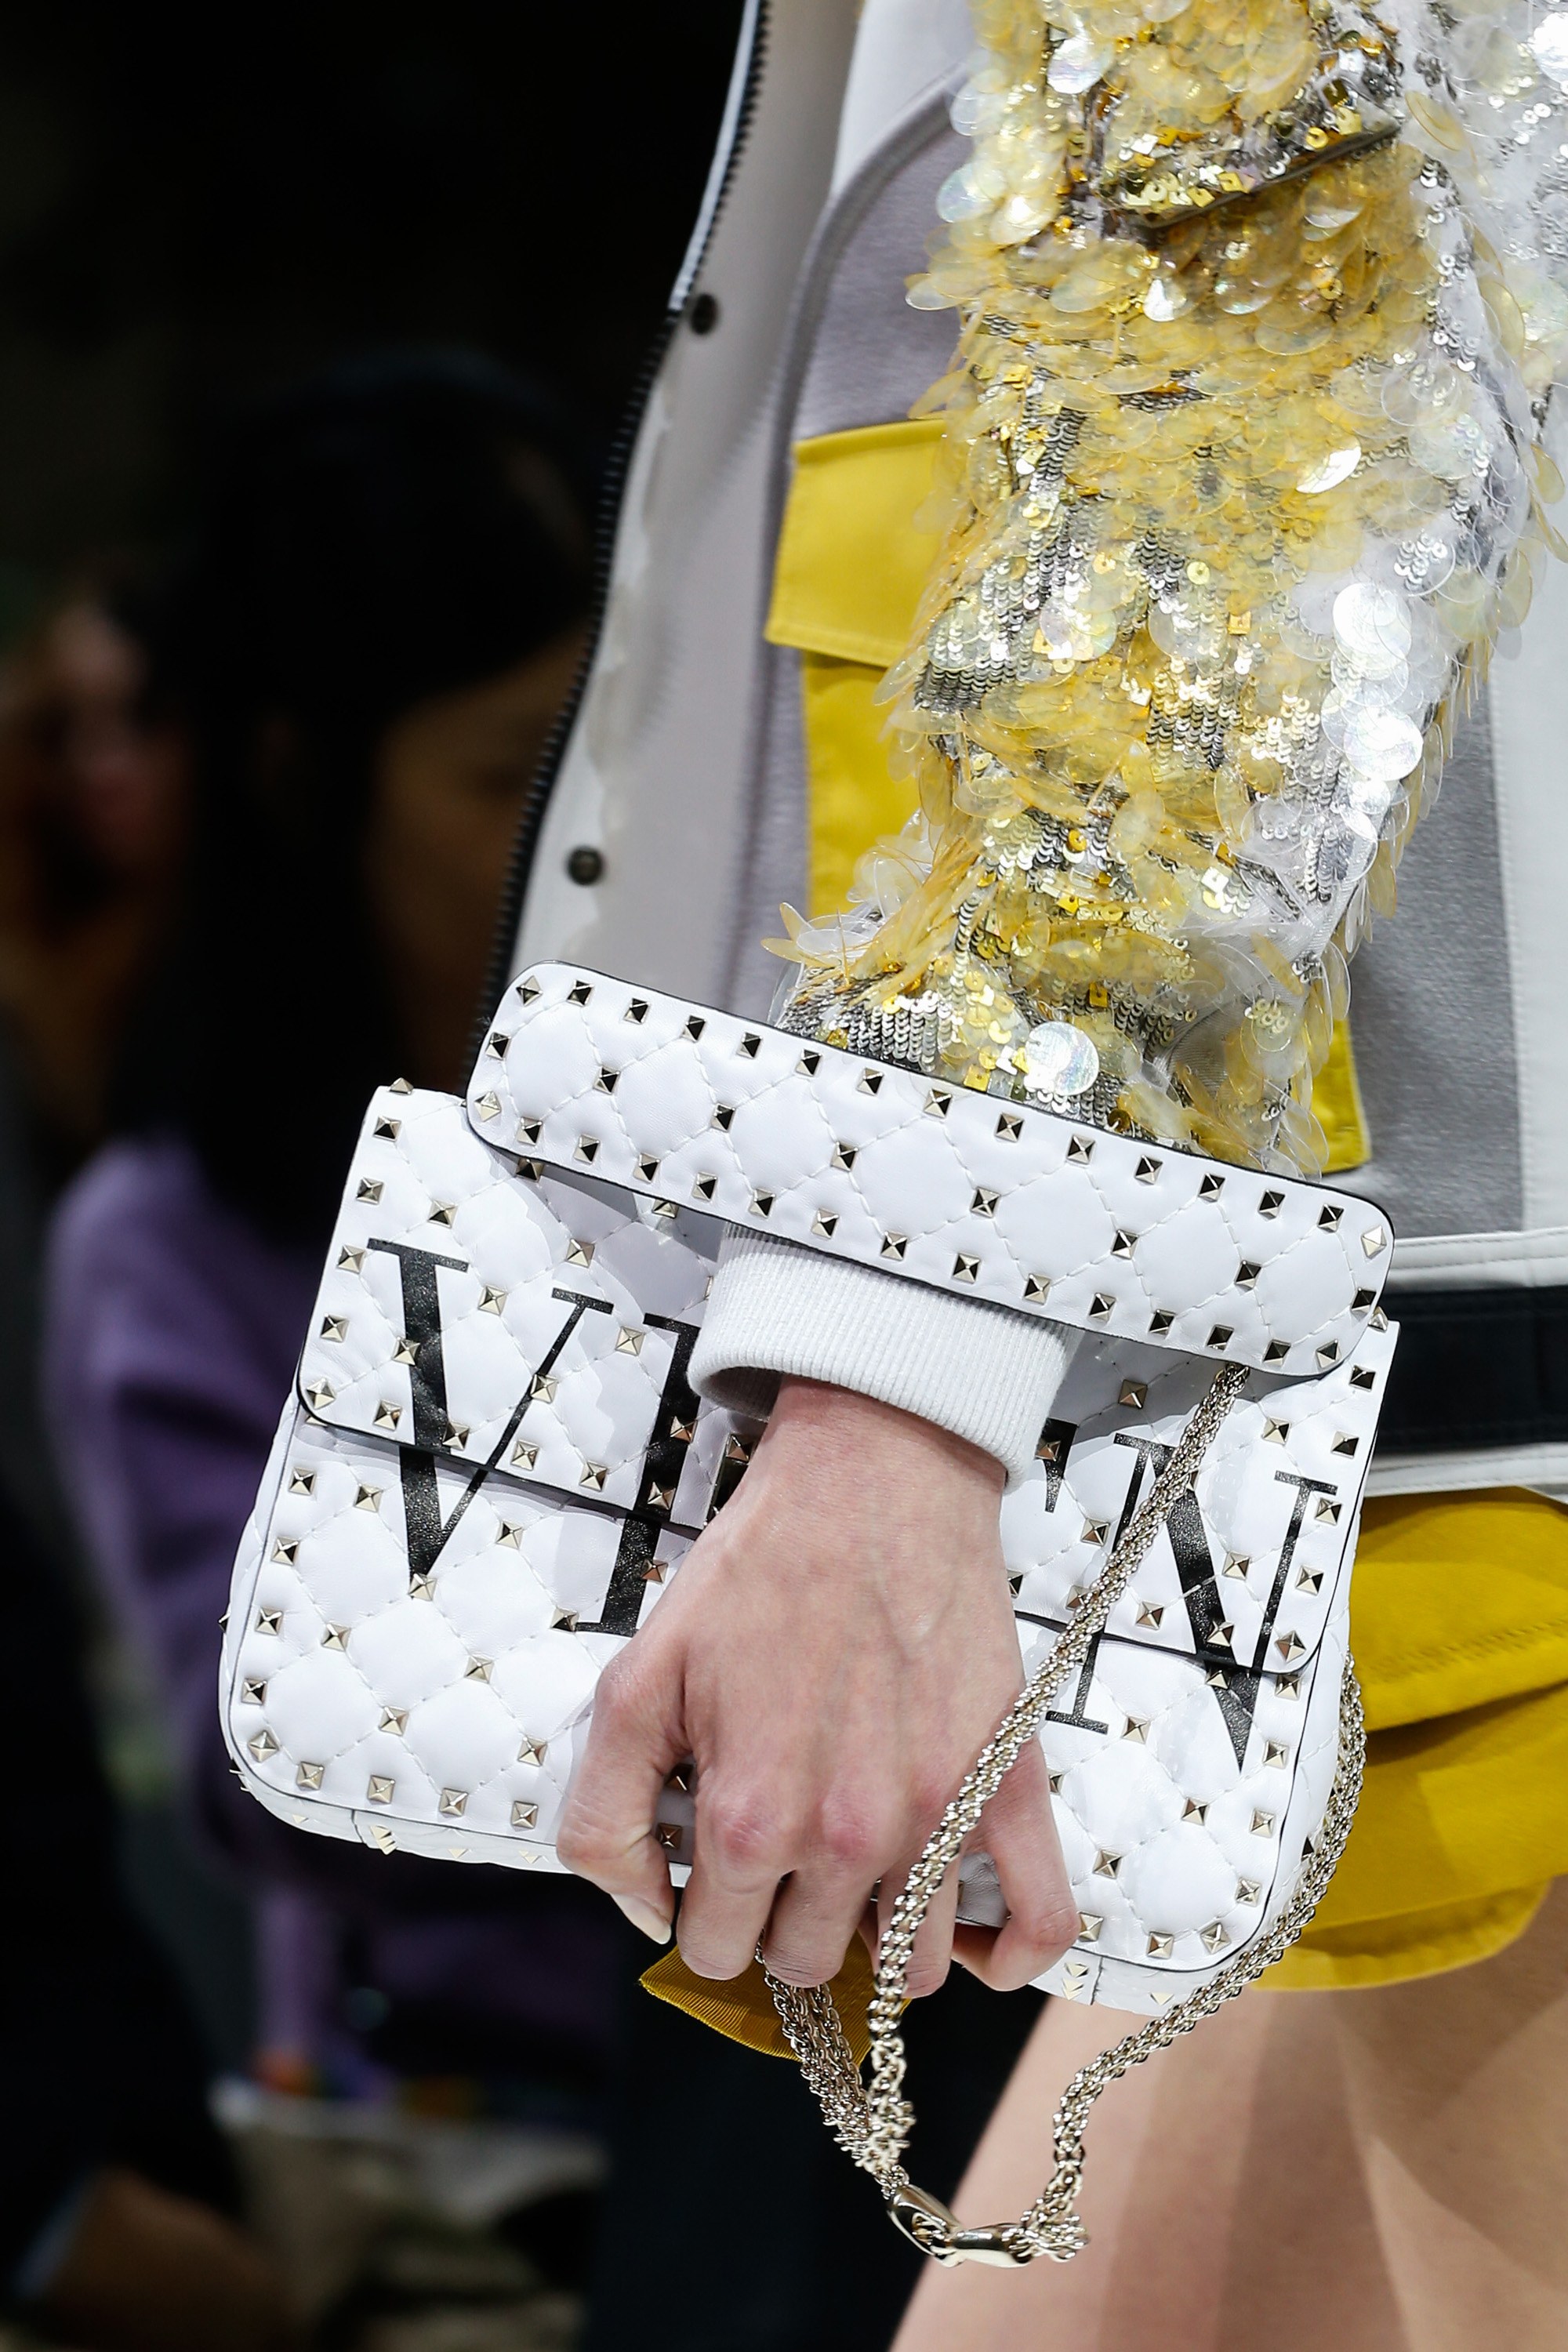 Valentino Rockstud Spike Bag Collection - Spotted Fashion